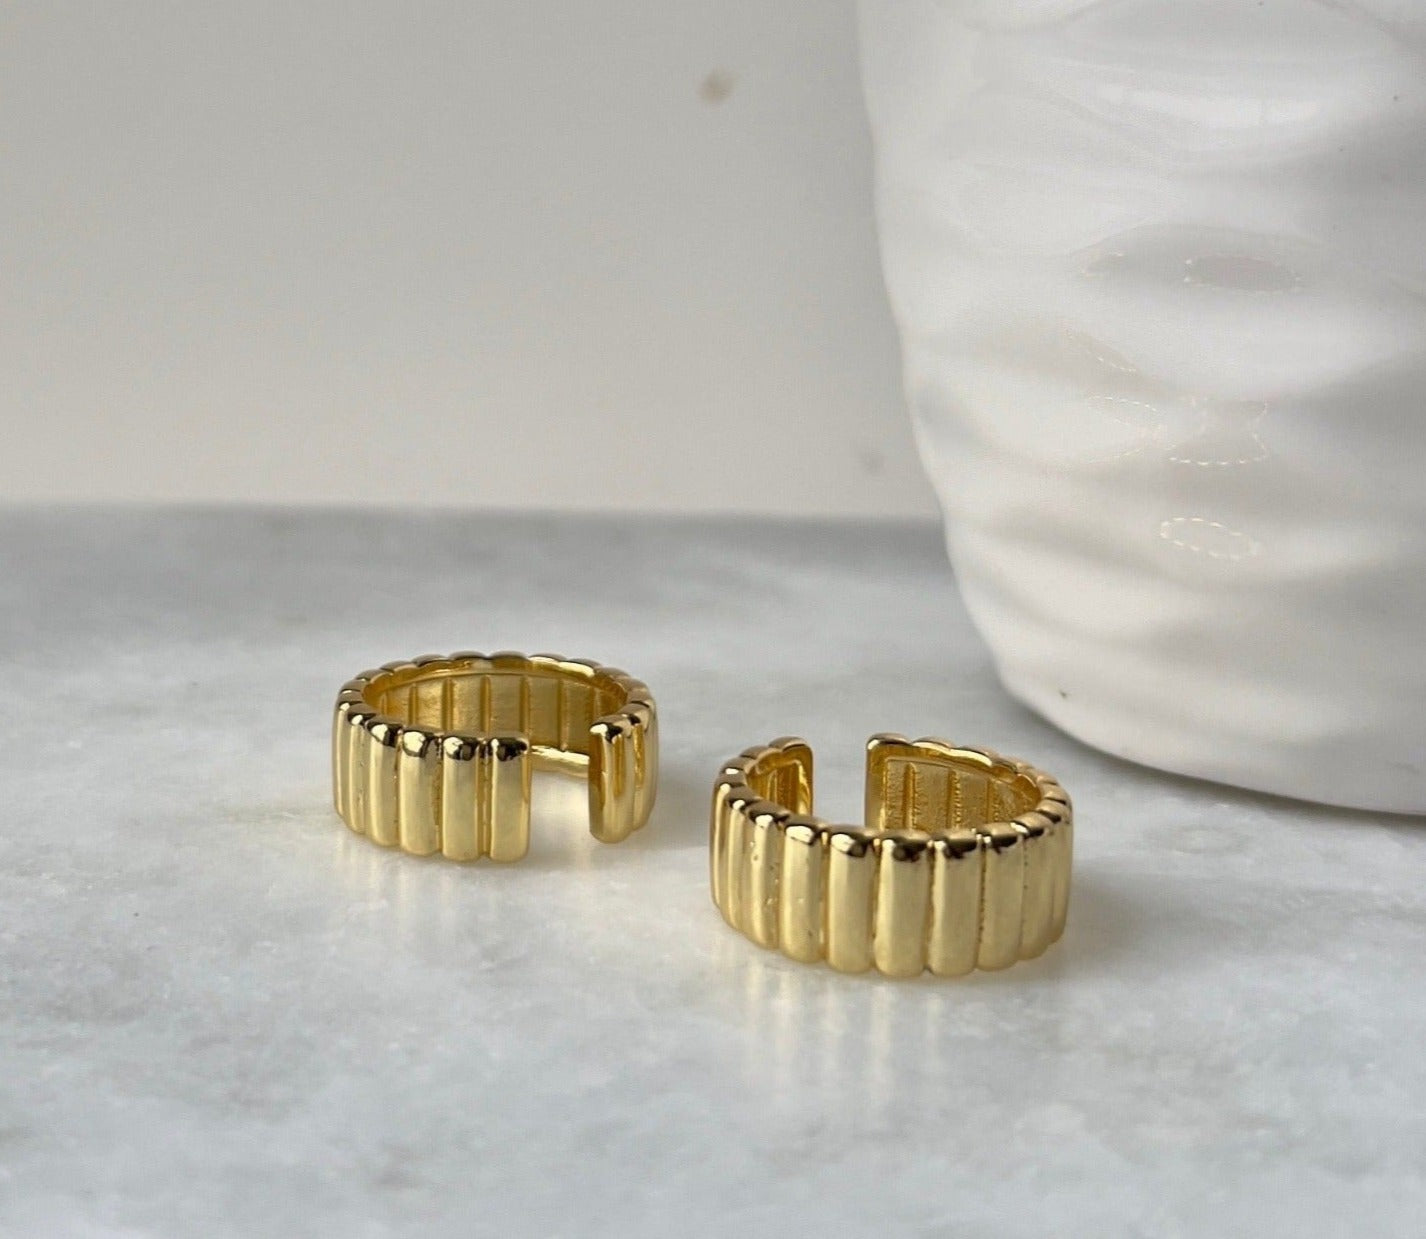 Chunky gold plated ring, statement jewelry piece